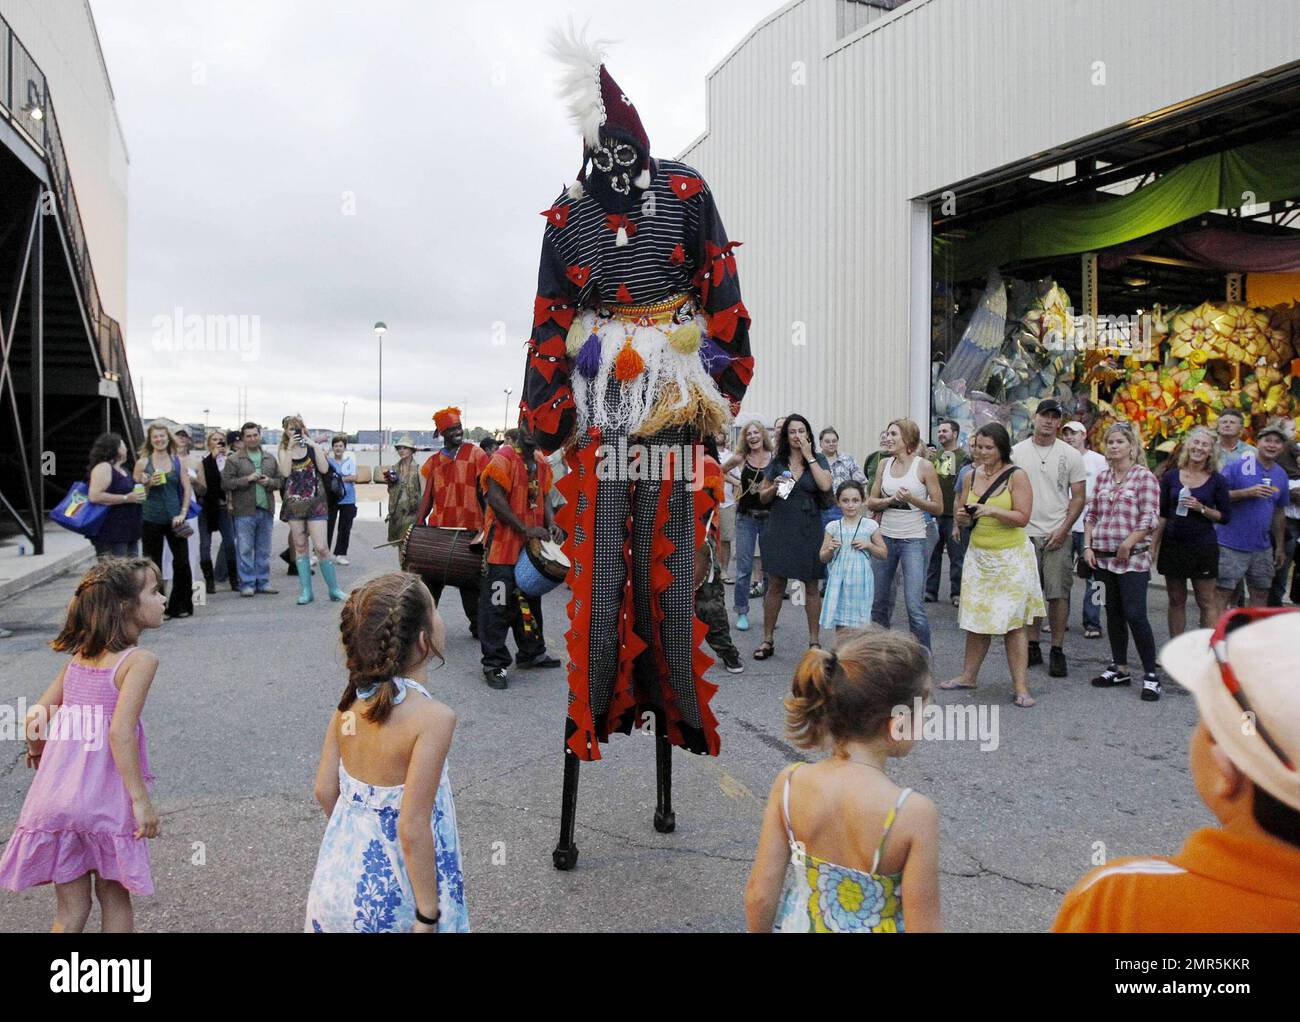 A costumed figure on stilts walks in front of children during the